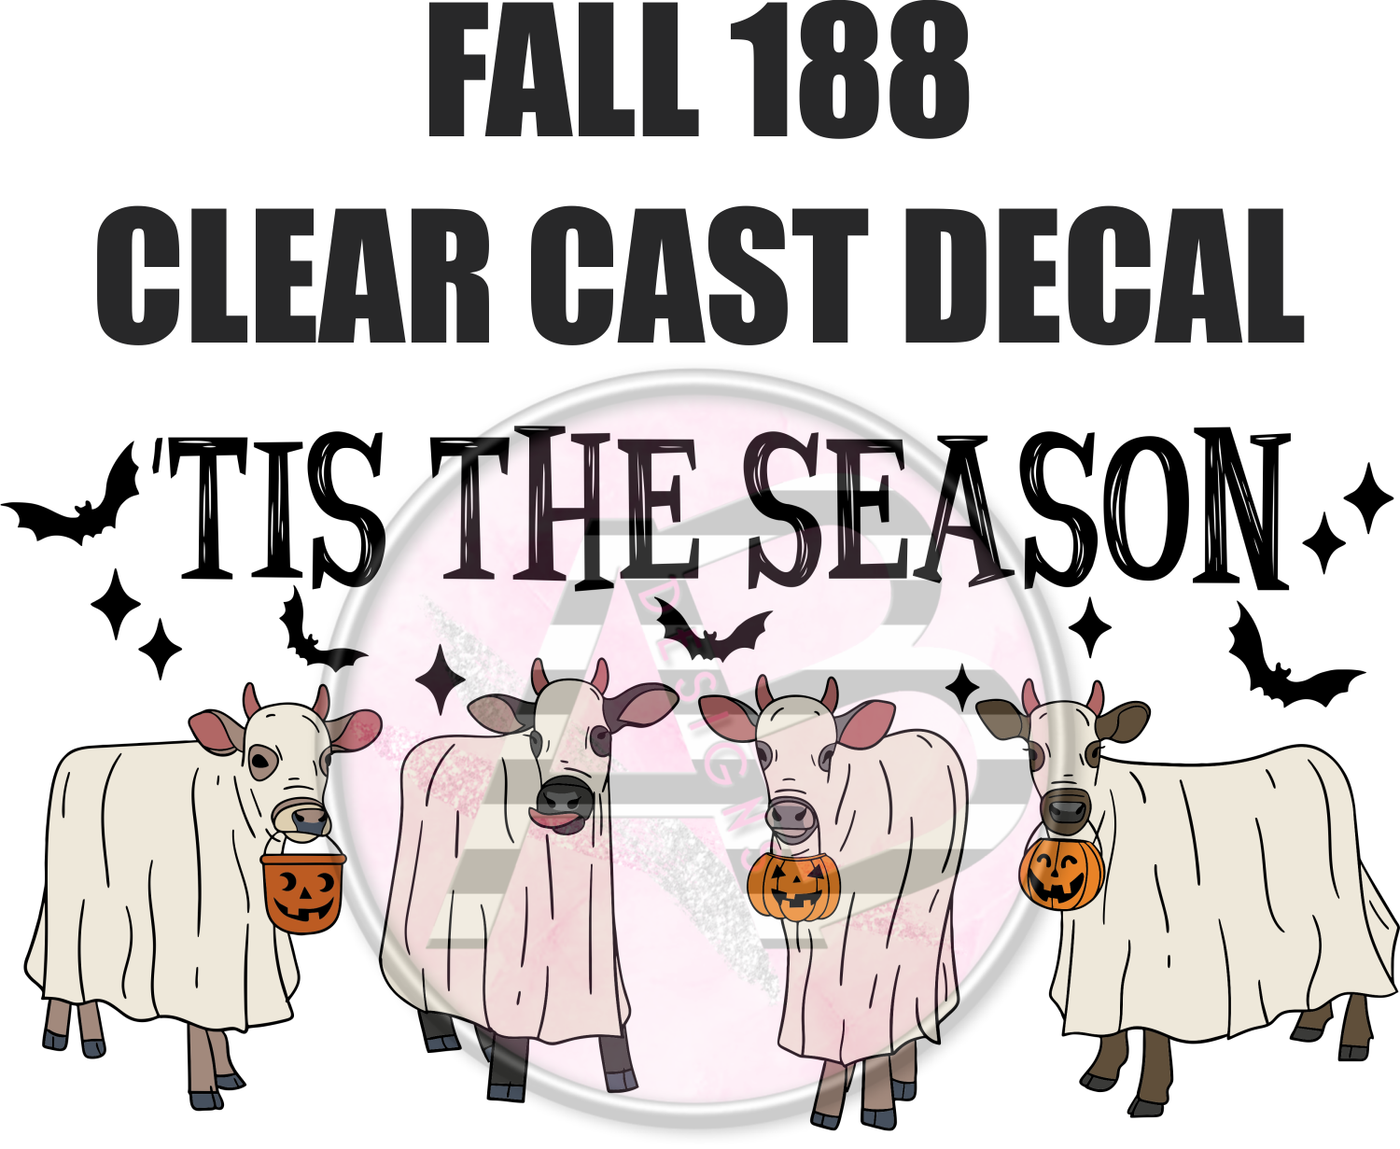 Fall 188 - Clear Cast Decal